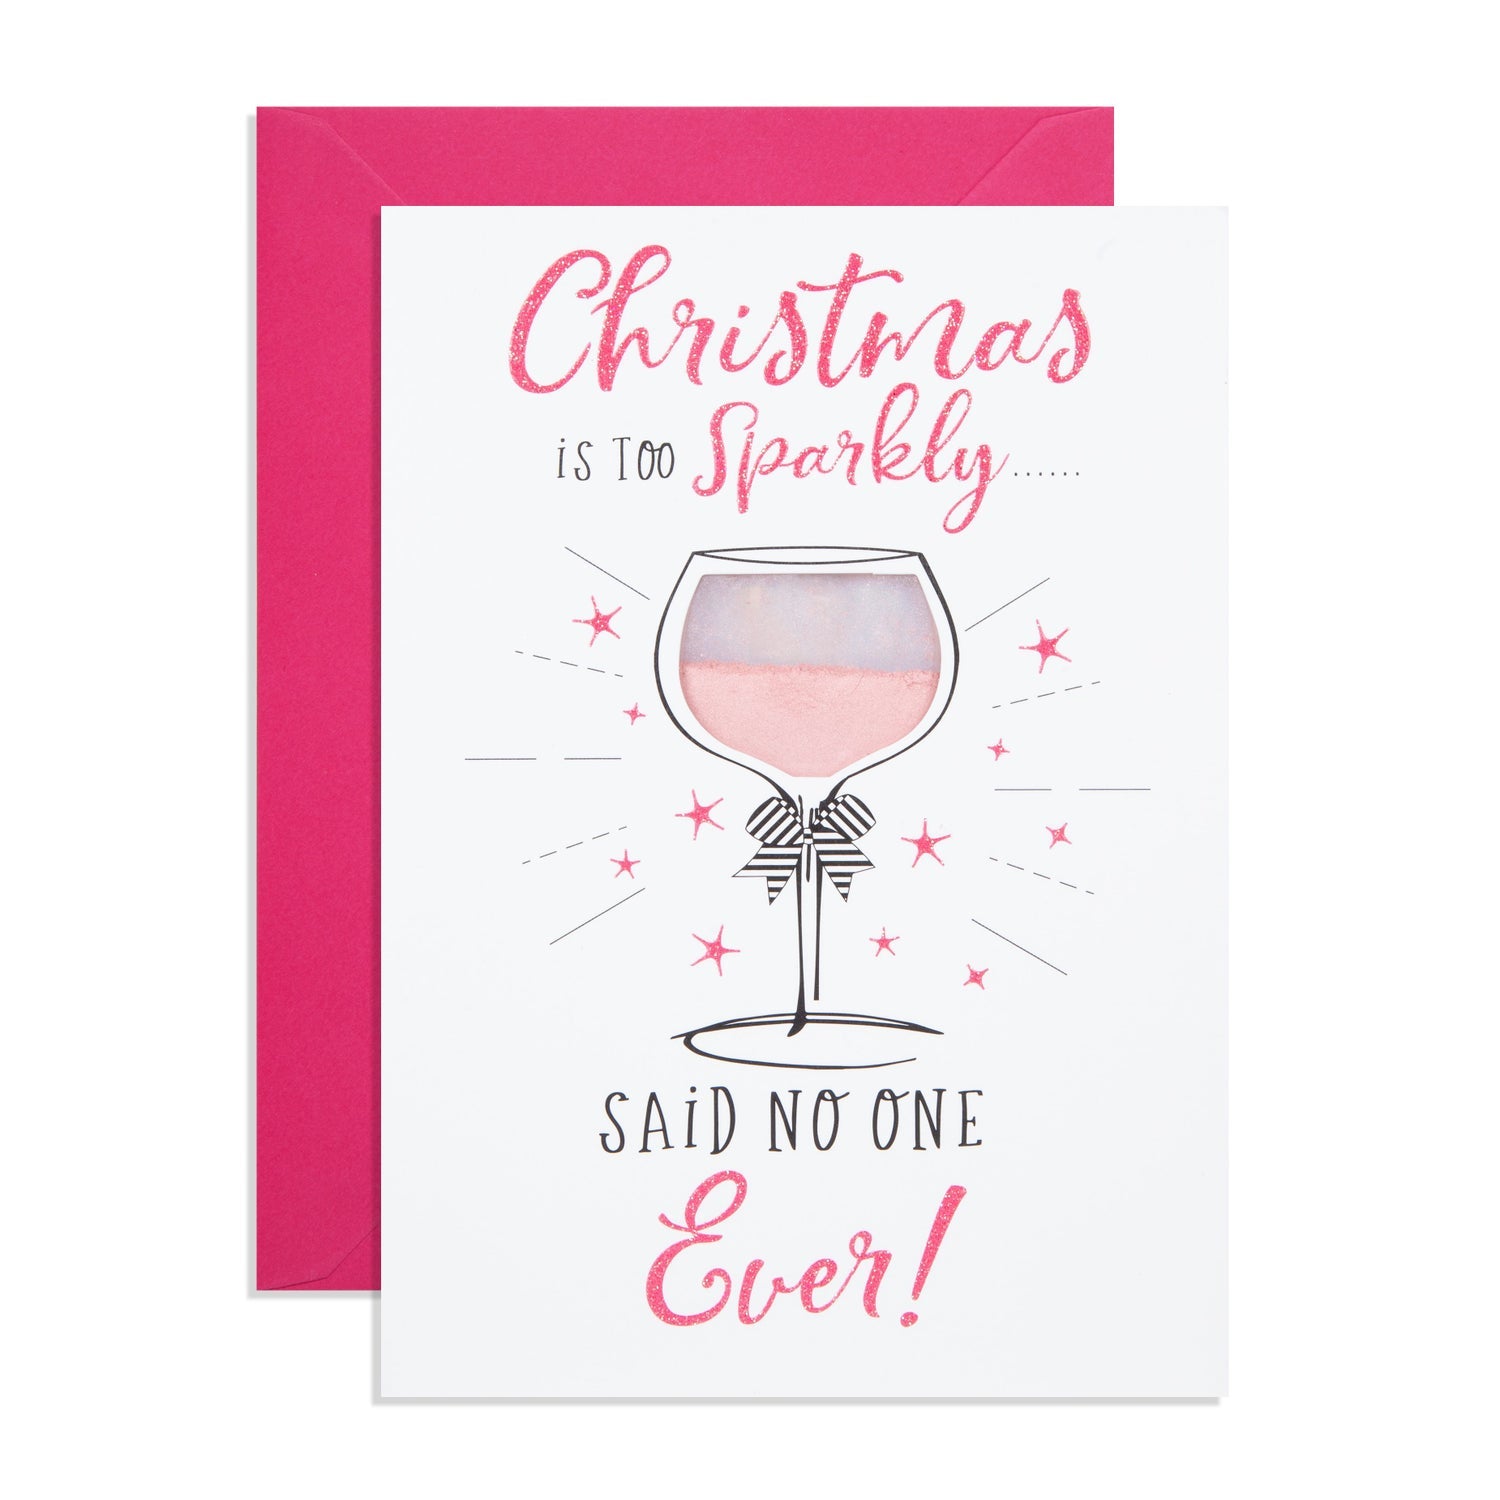 Christmas is too sparkly said no one ever! - card contains pink candy drinks shimmer